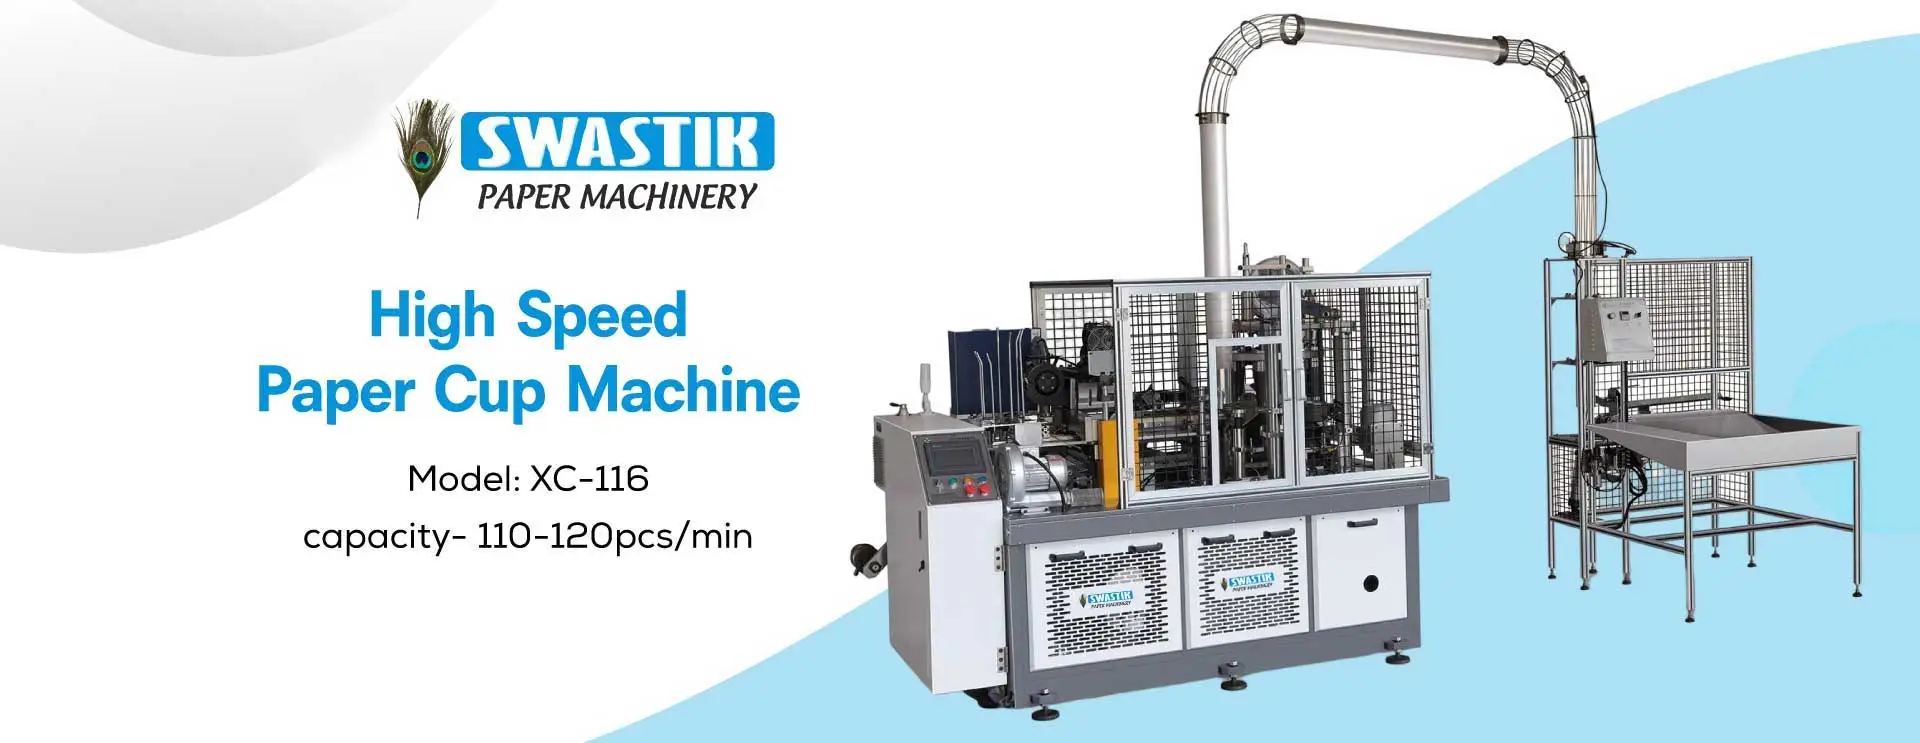 High Speed Paper Cup Machine Manufacturers in Nagpur